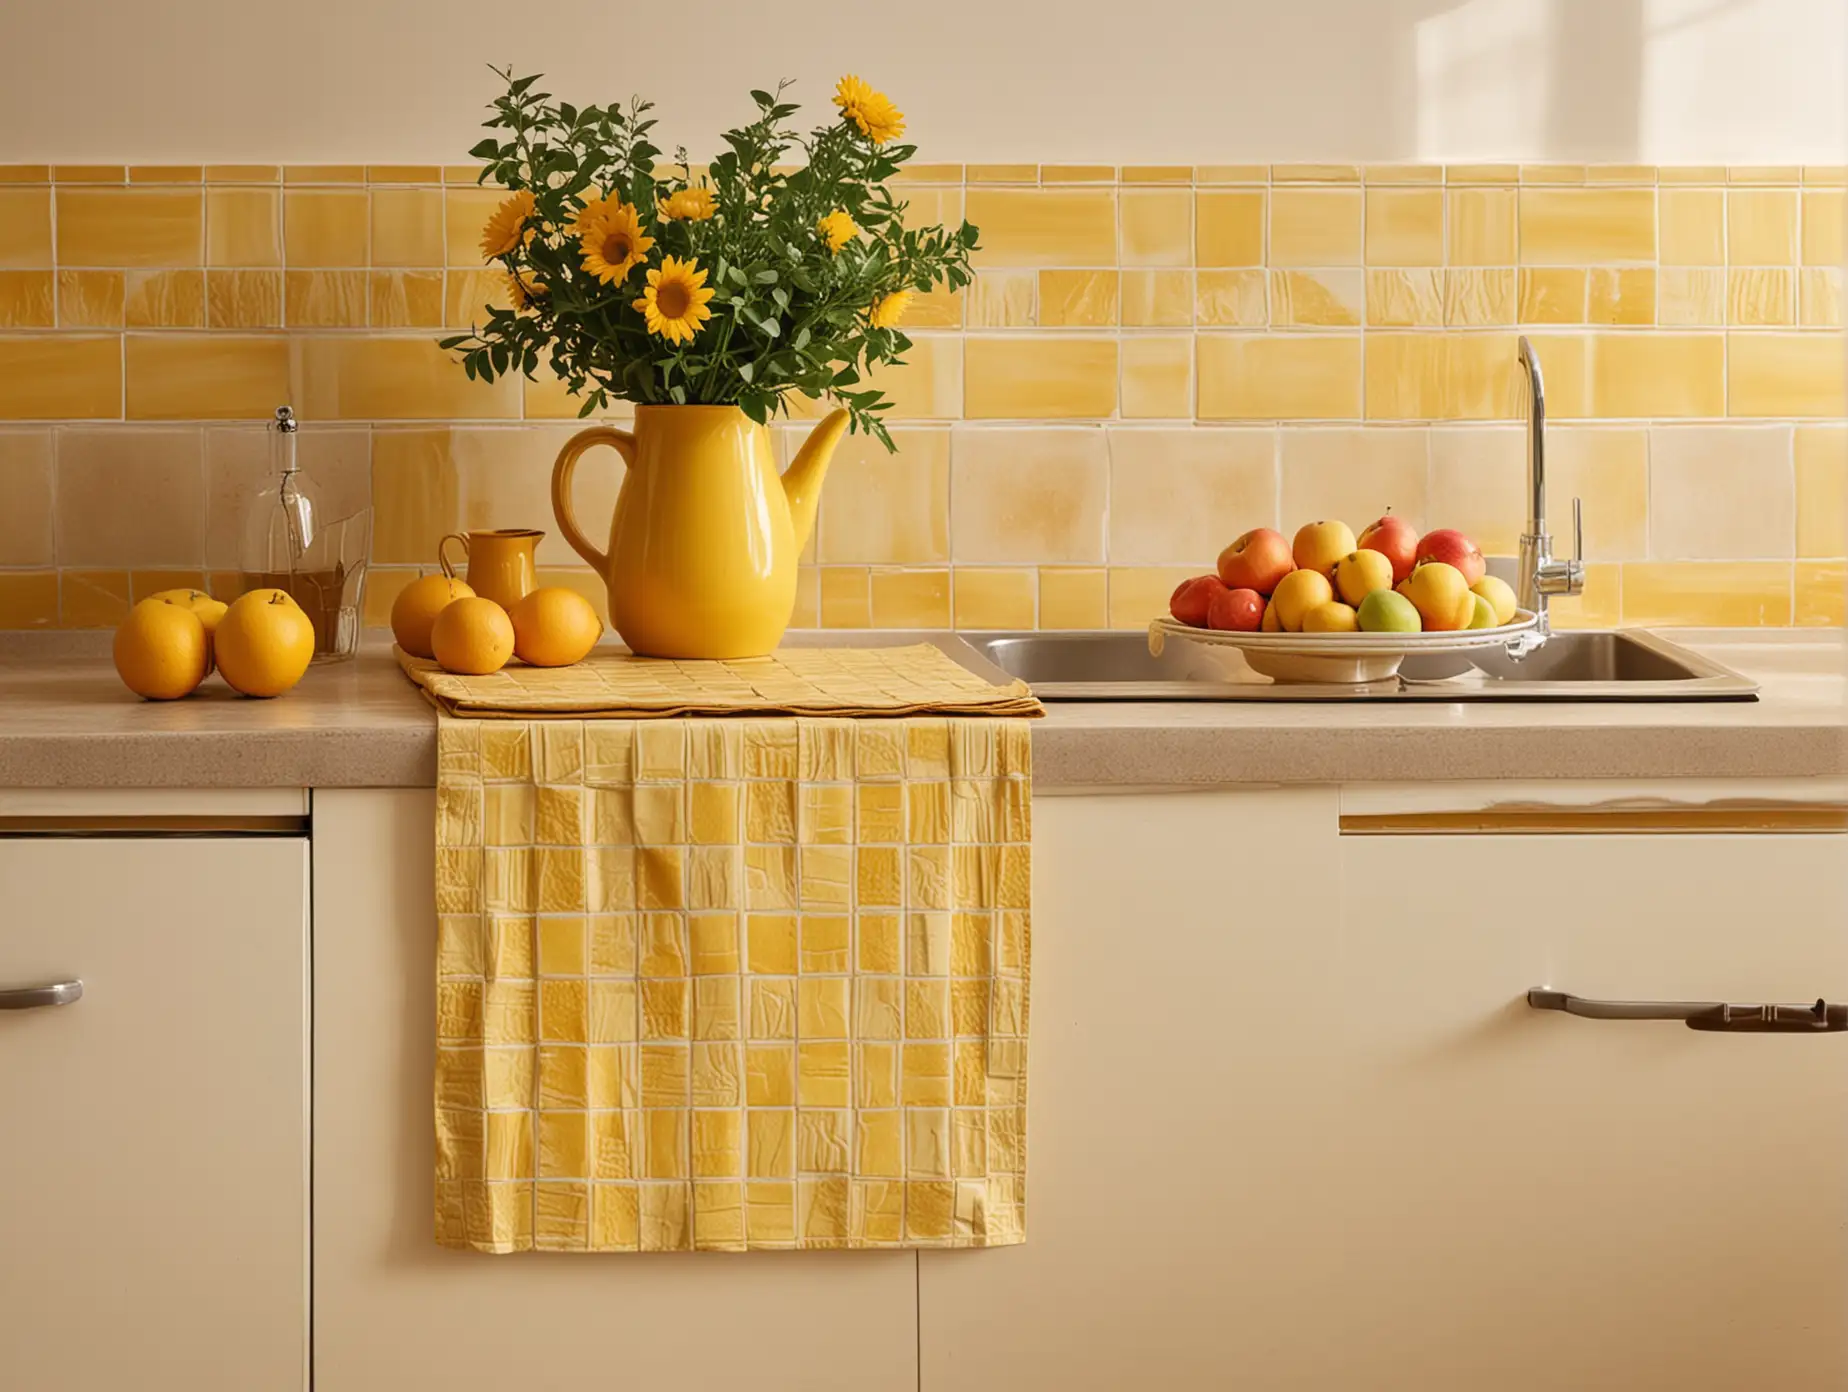 Bright-Kitchen-Apron-with-Fruits-on-Countertop